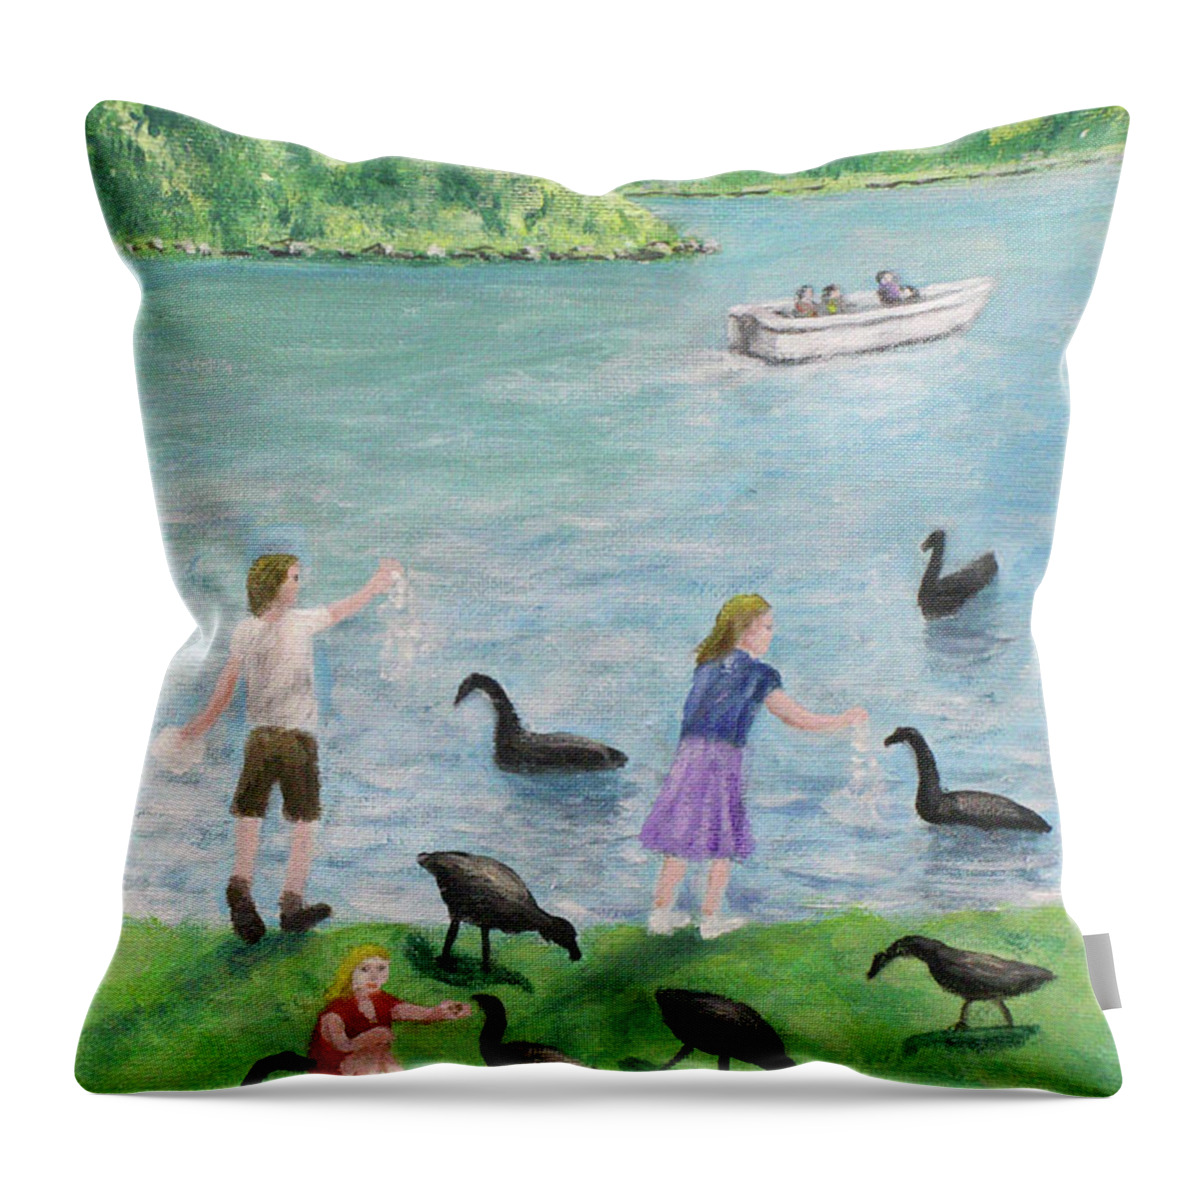  Throw Pillow featuring the painting Feeding the Ducks Fairhaven Lake Lytham St Annes by Ronald Haber